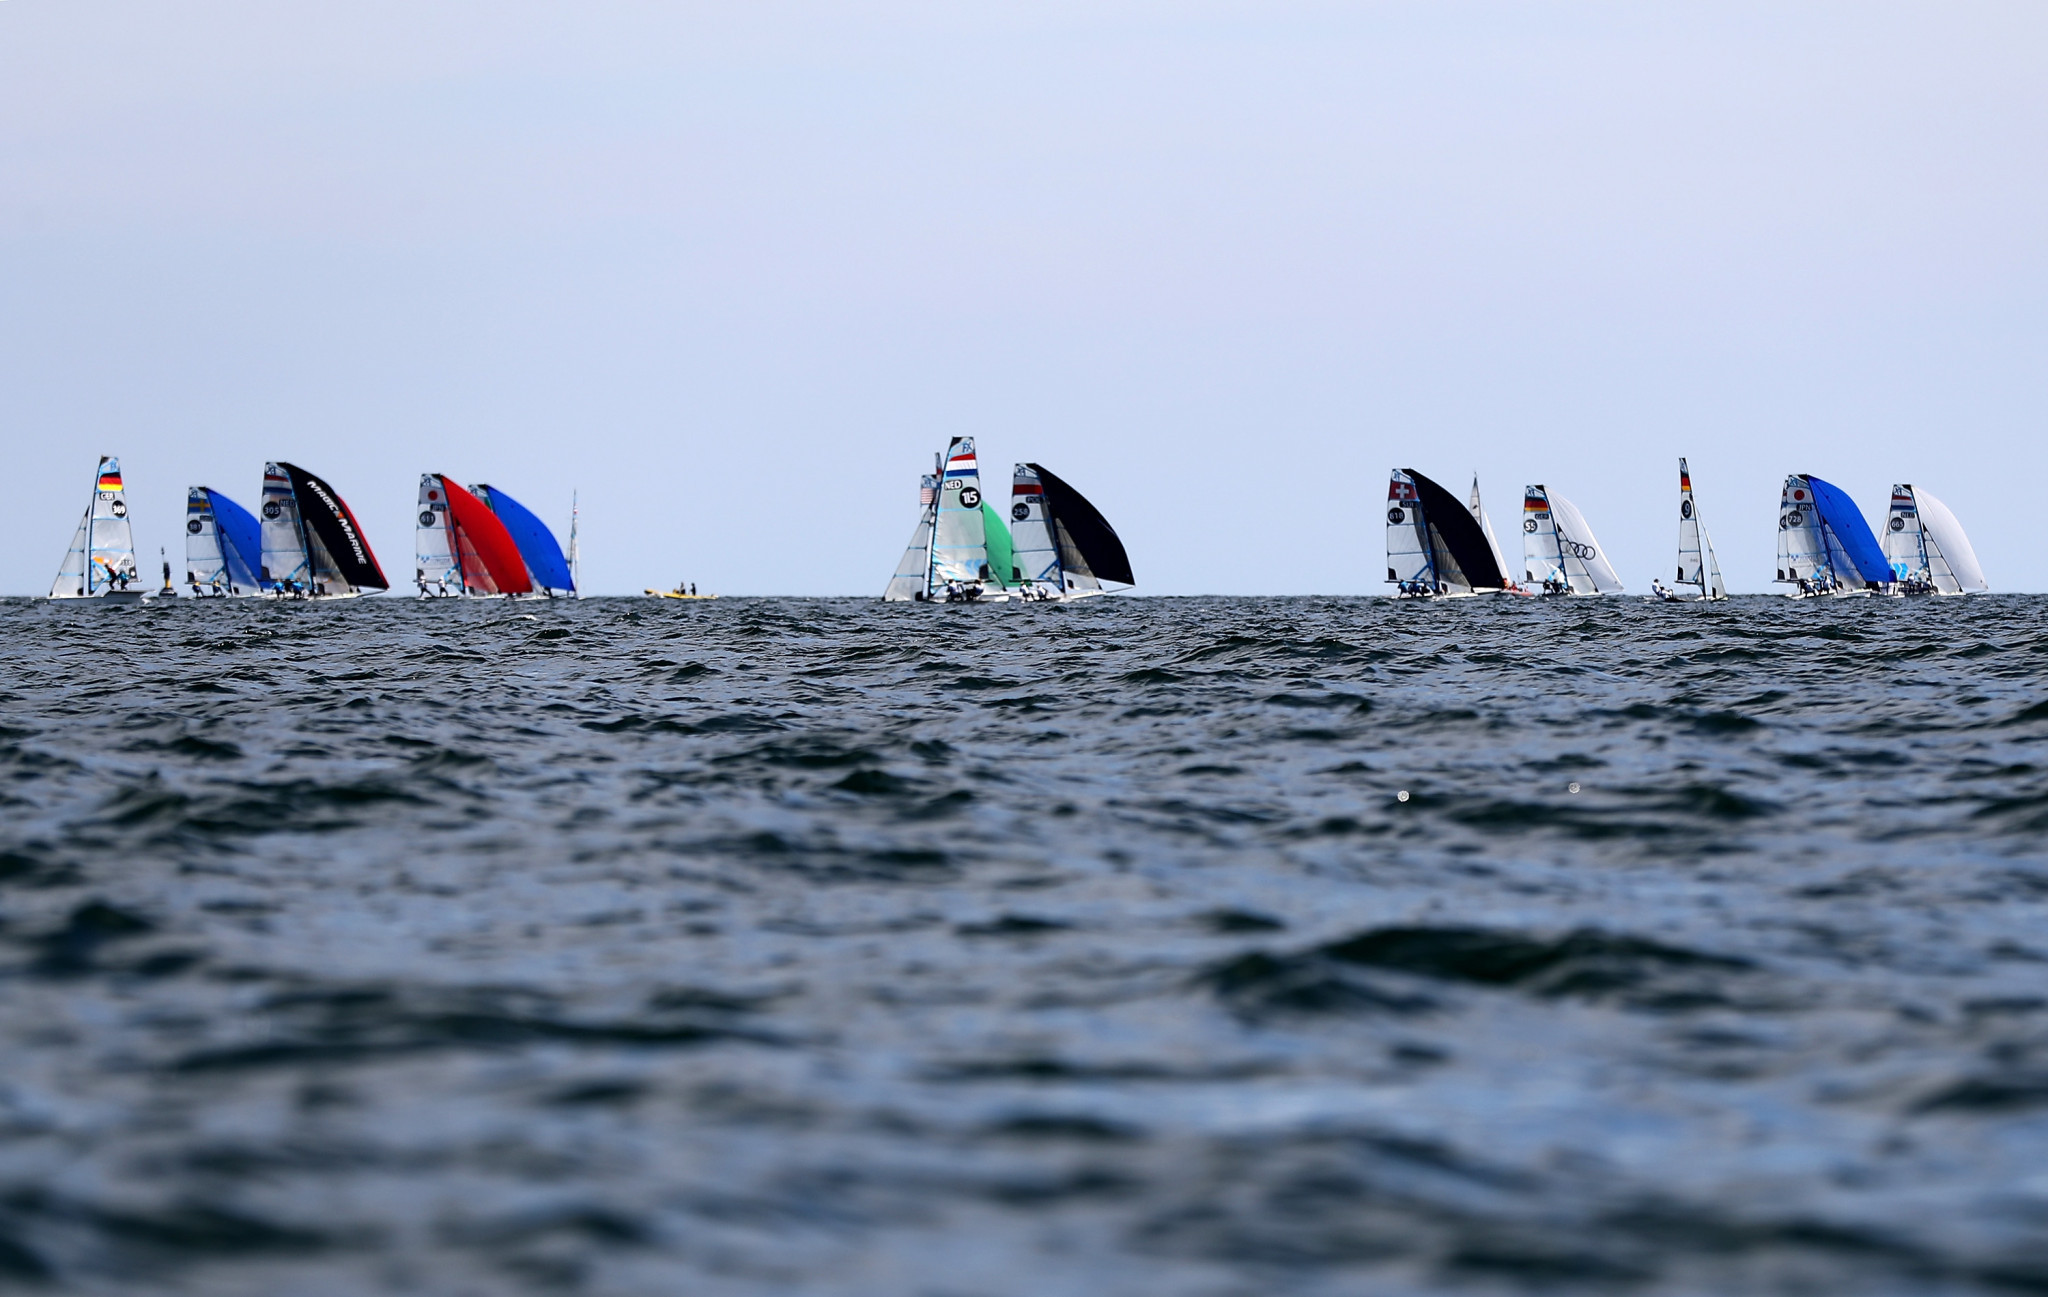 Dutch sailors lead 49er and 49erFX standings at World Championships in Mussanah